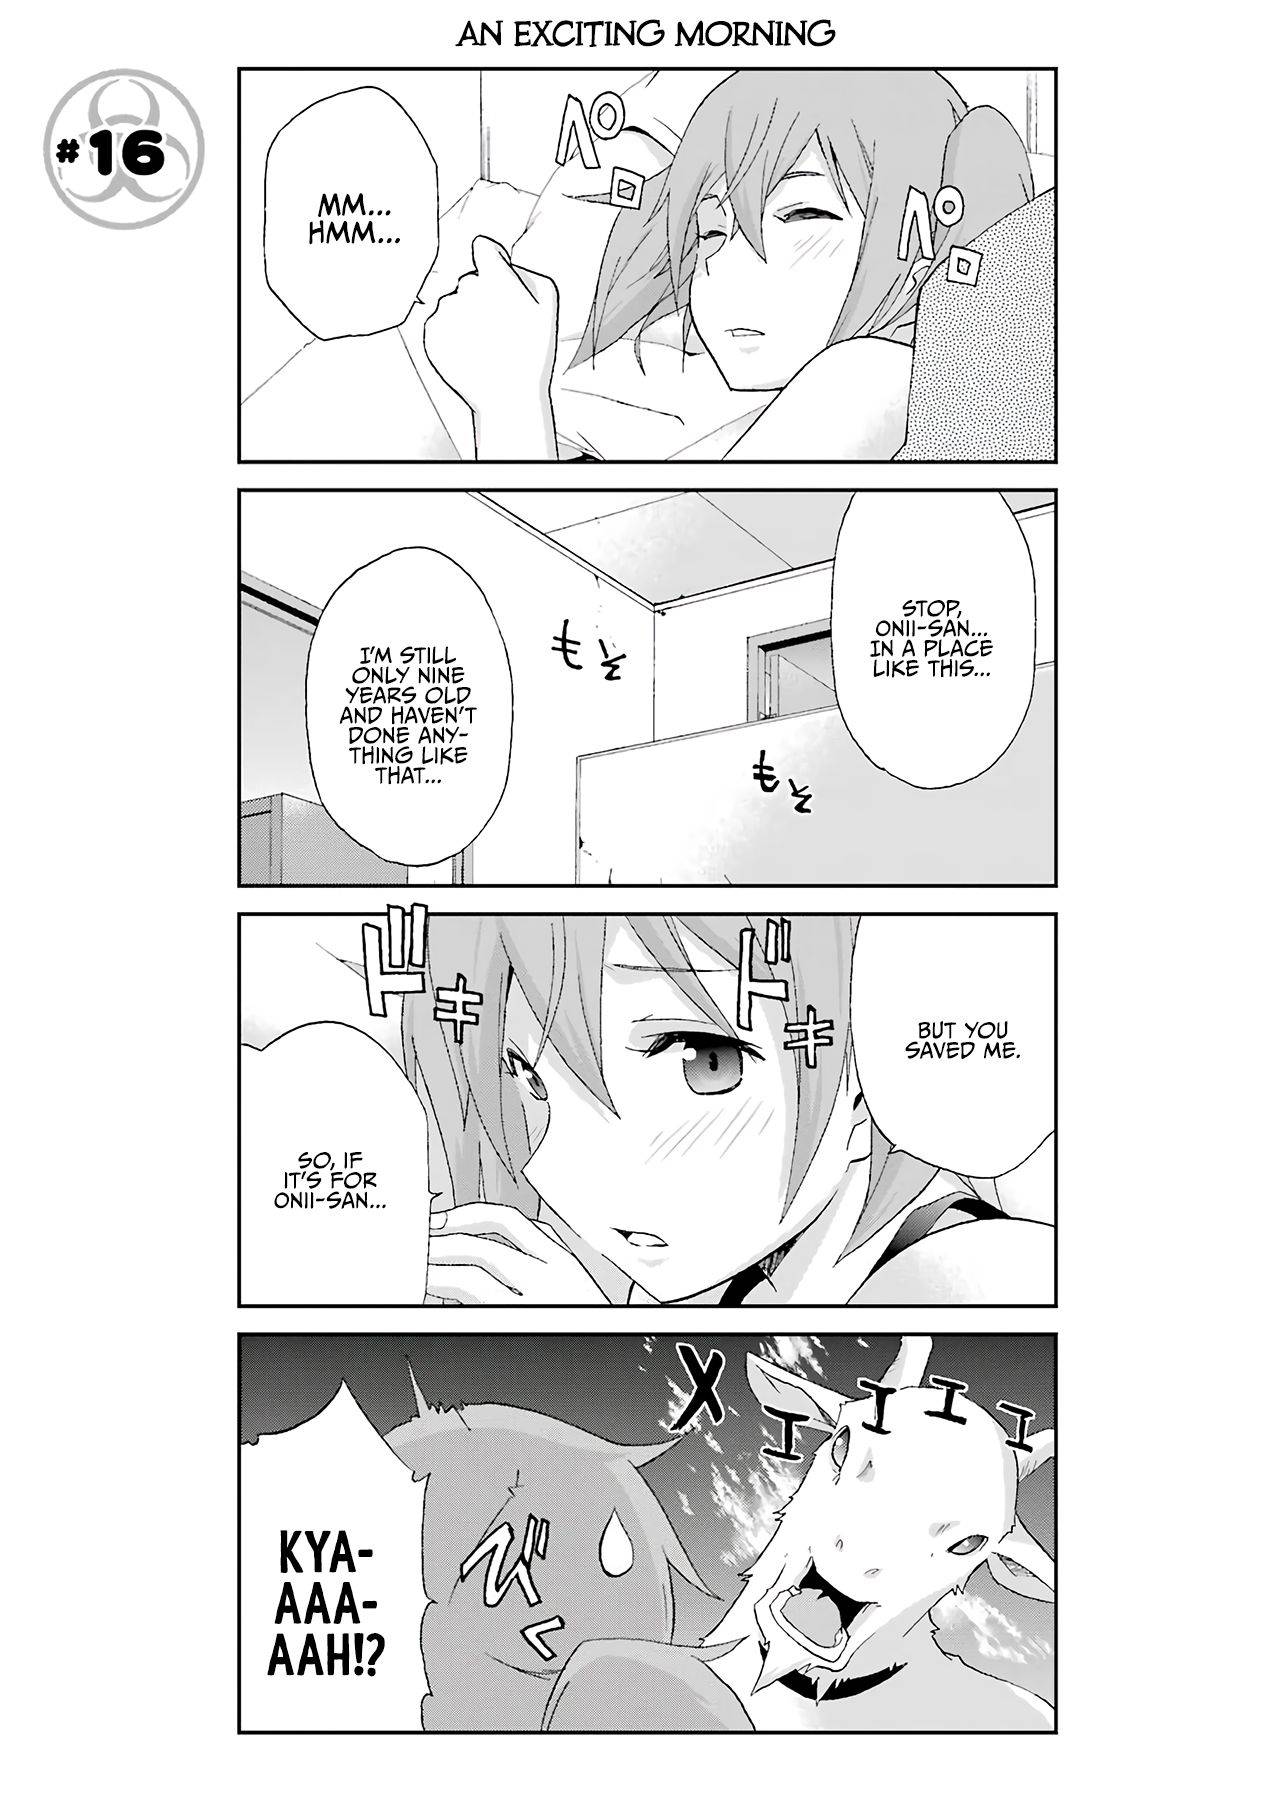 Are You Alive Honda-Kun? - chapter 16 - #1